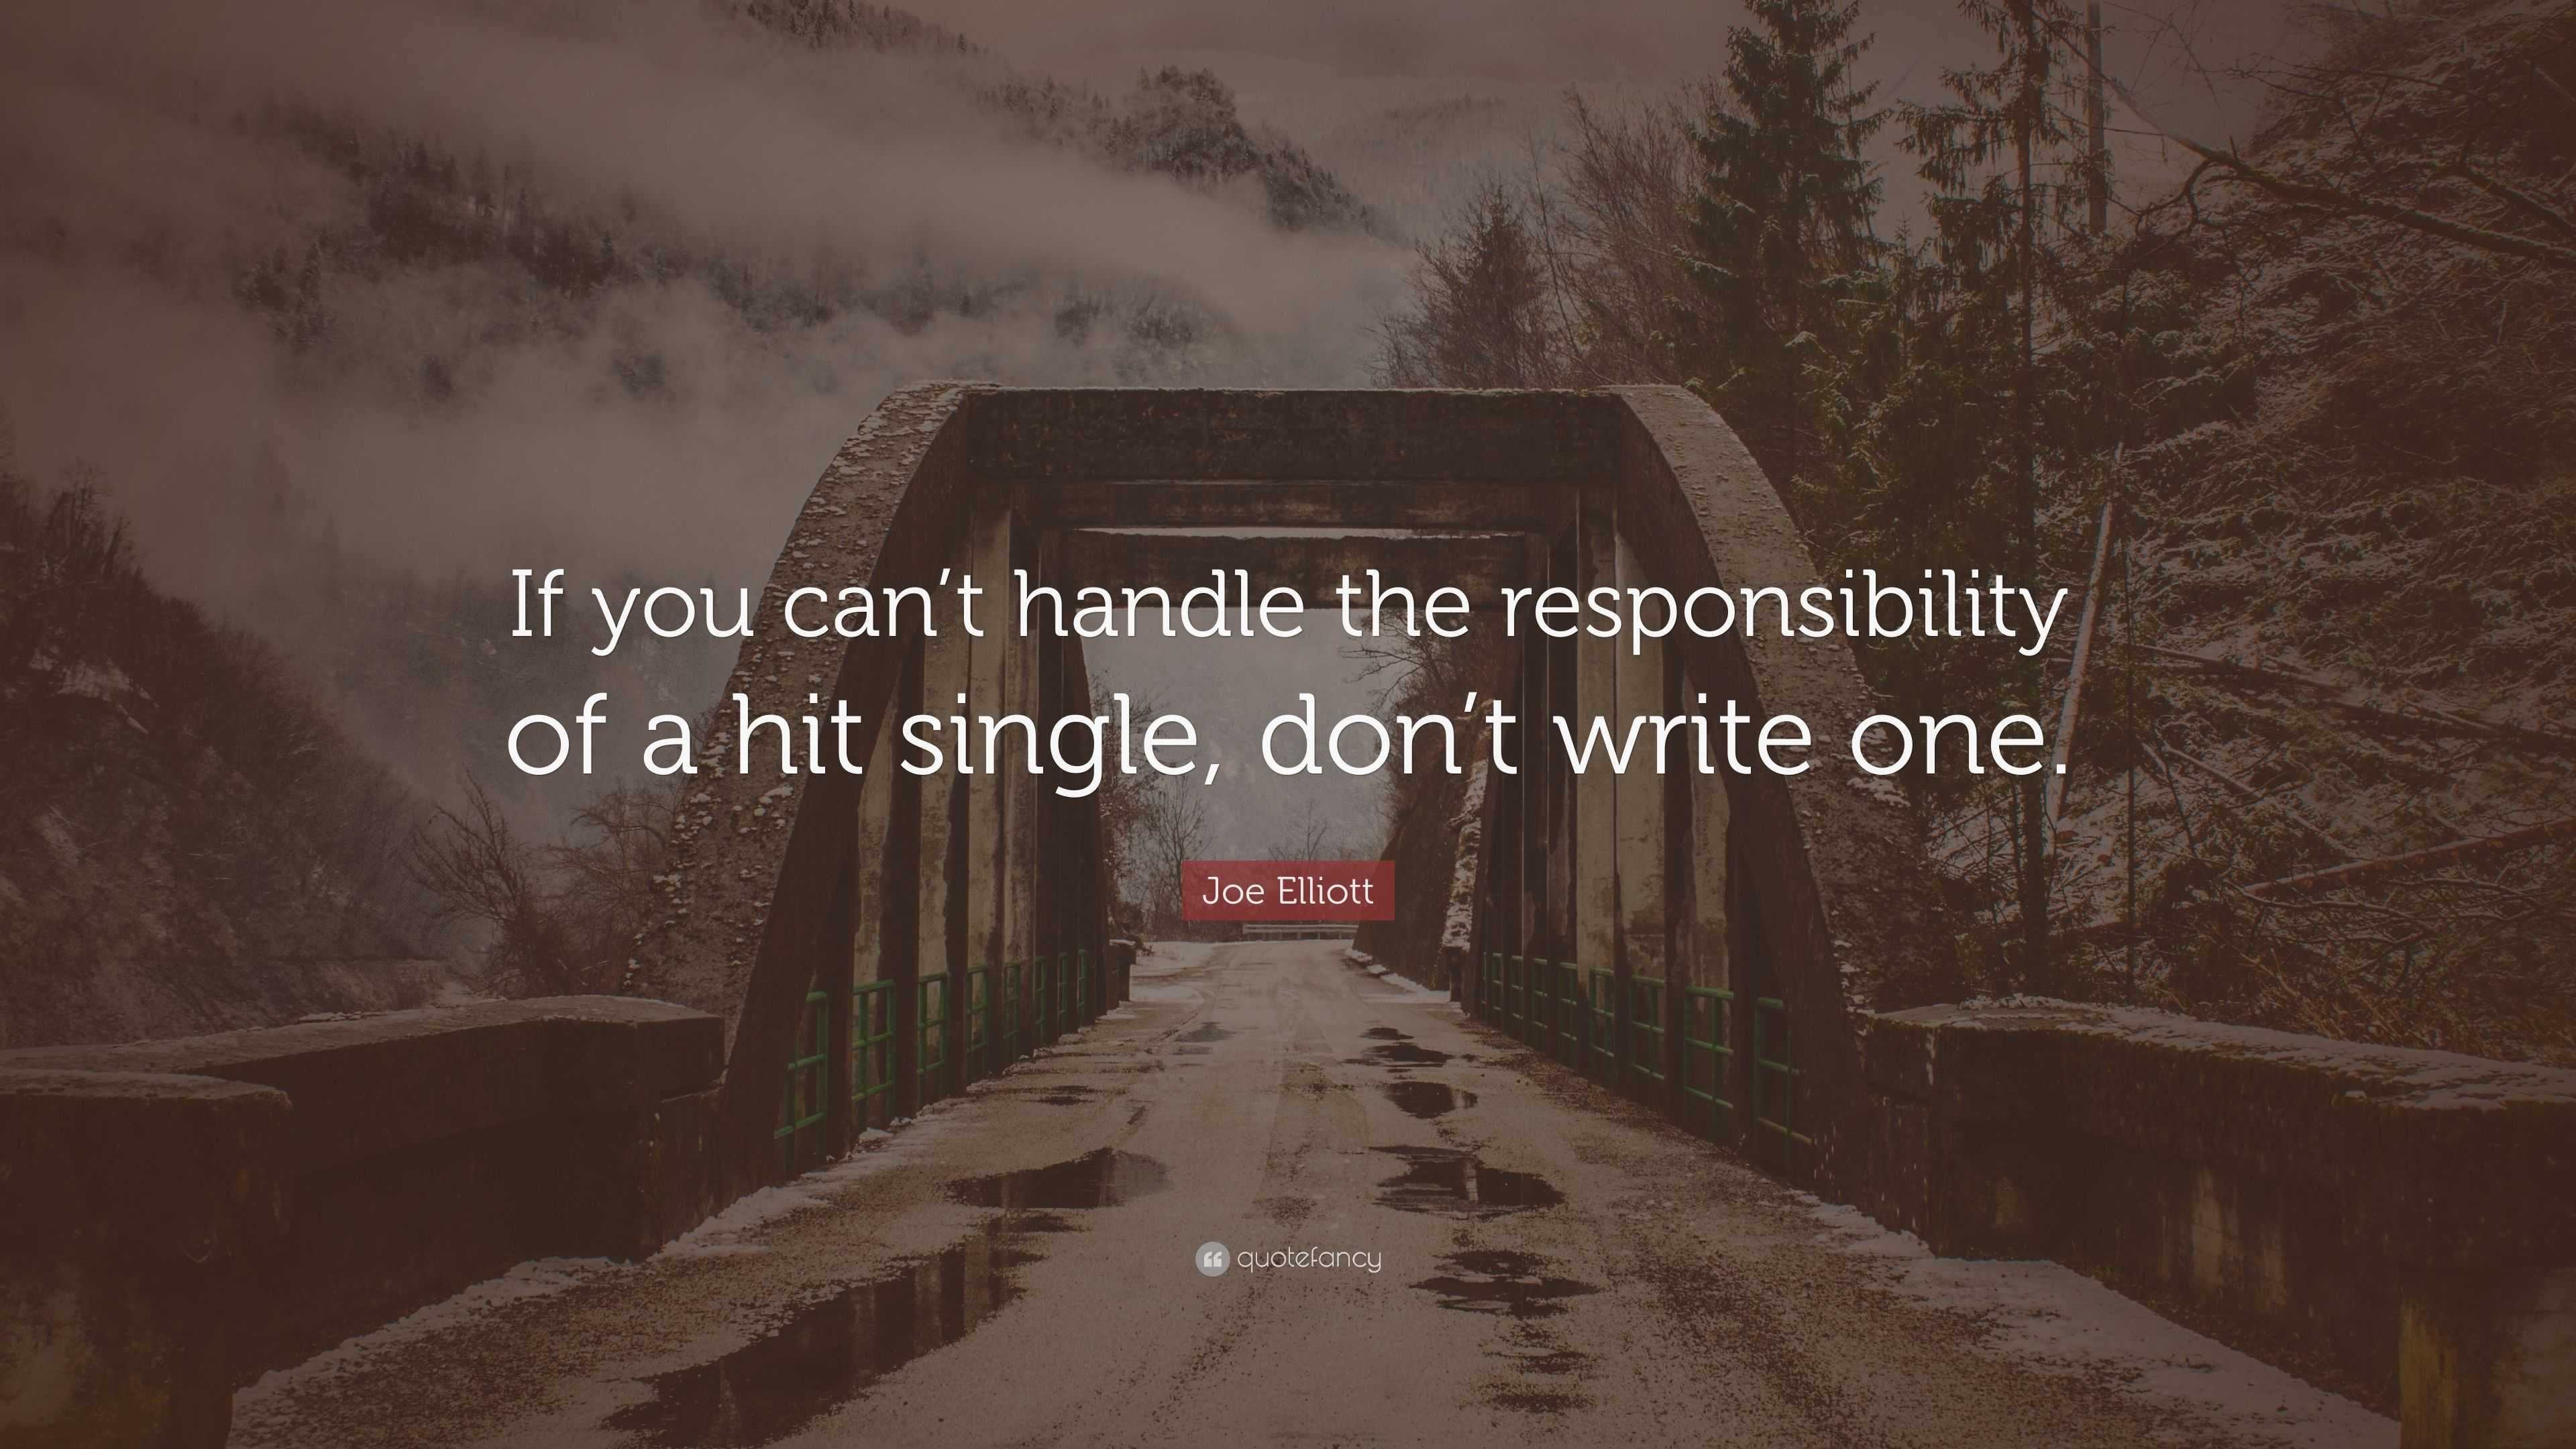 Joe Elliott Quote: “If you can’t handle the responsibility of a hit ...